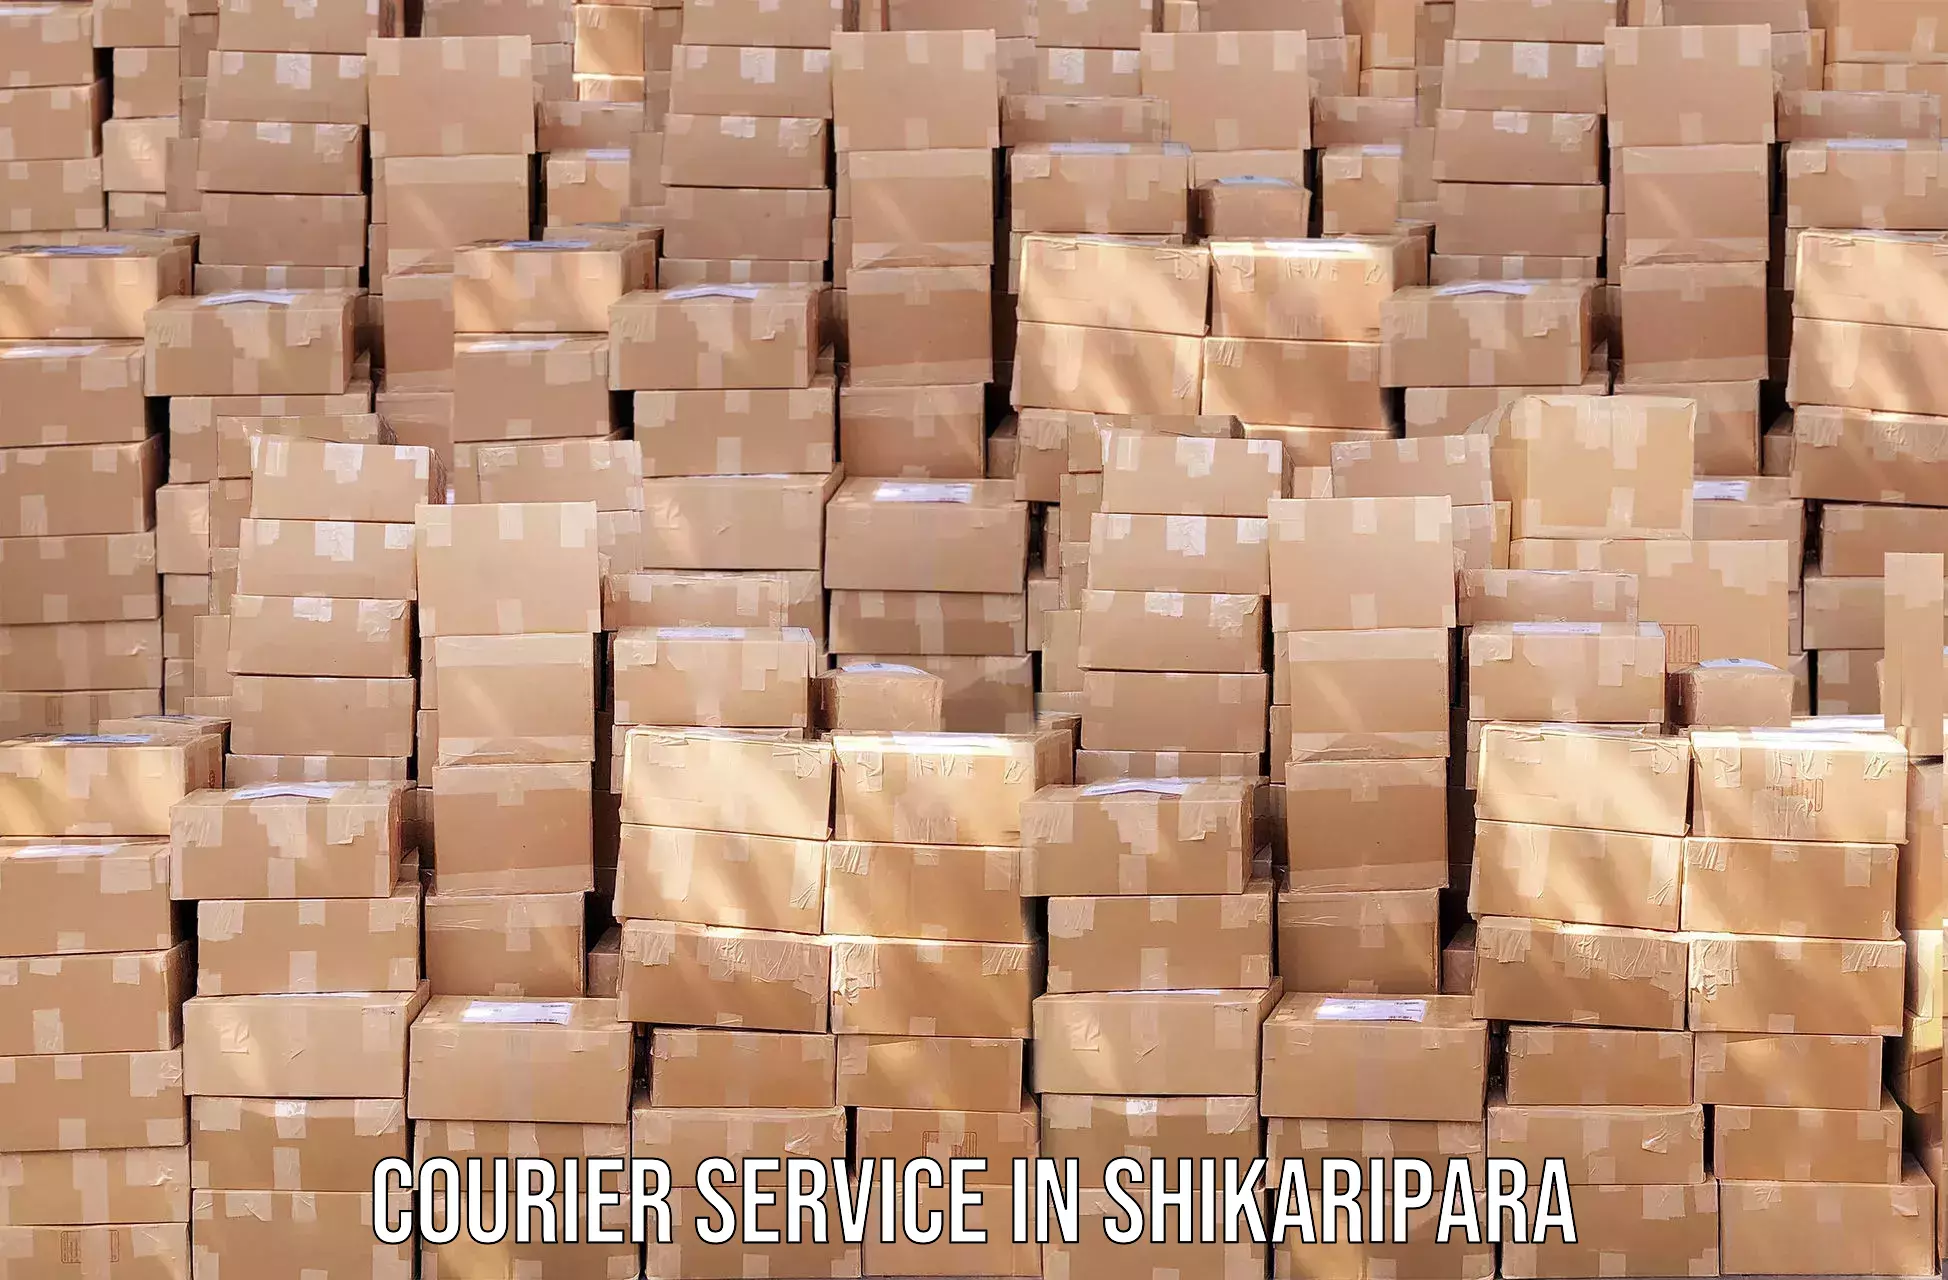 Expedited parcel delivery in Shikaripara